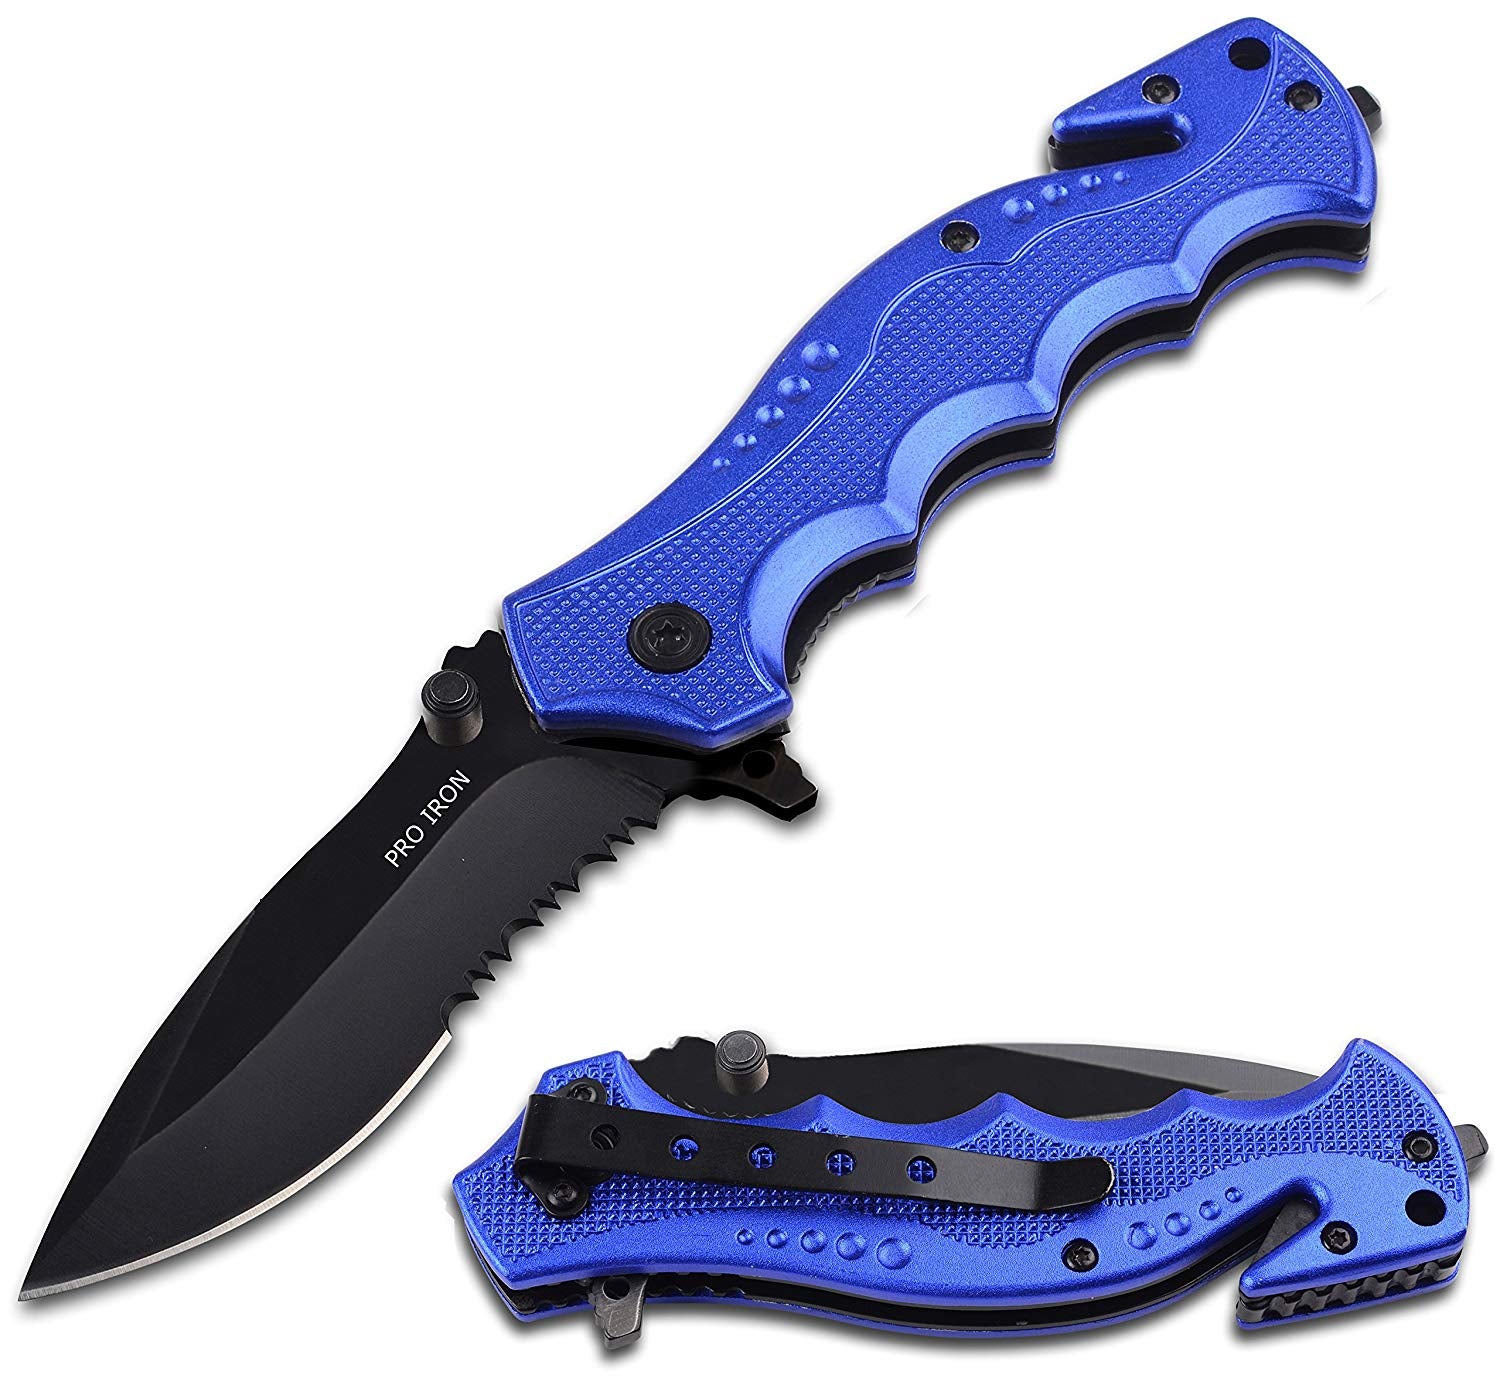 Serrated Edge Outdoor Survival Camping Hunting Knife - 2 Knives - Telk 